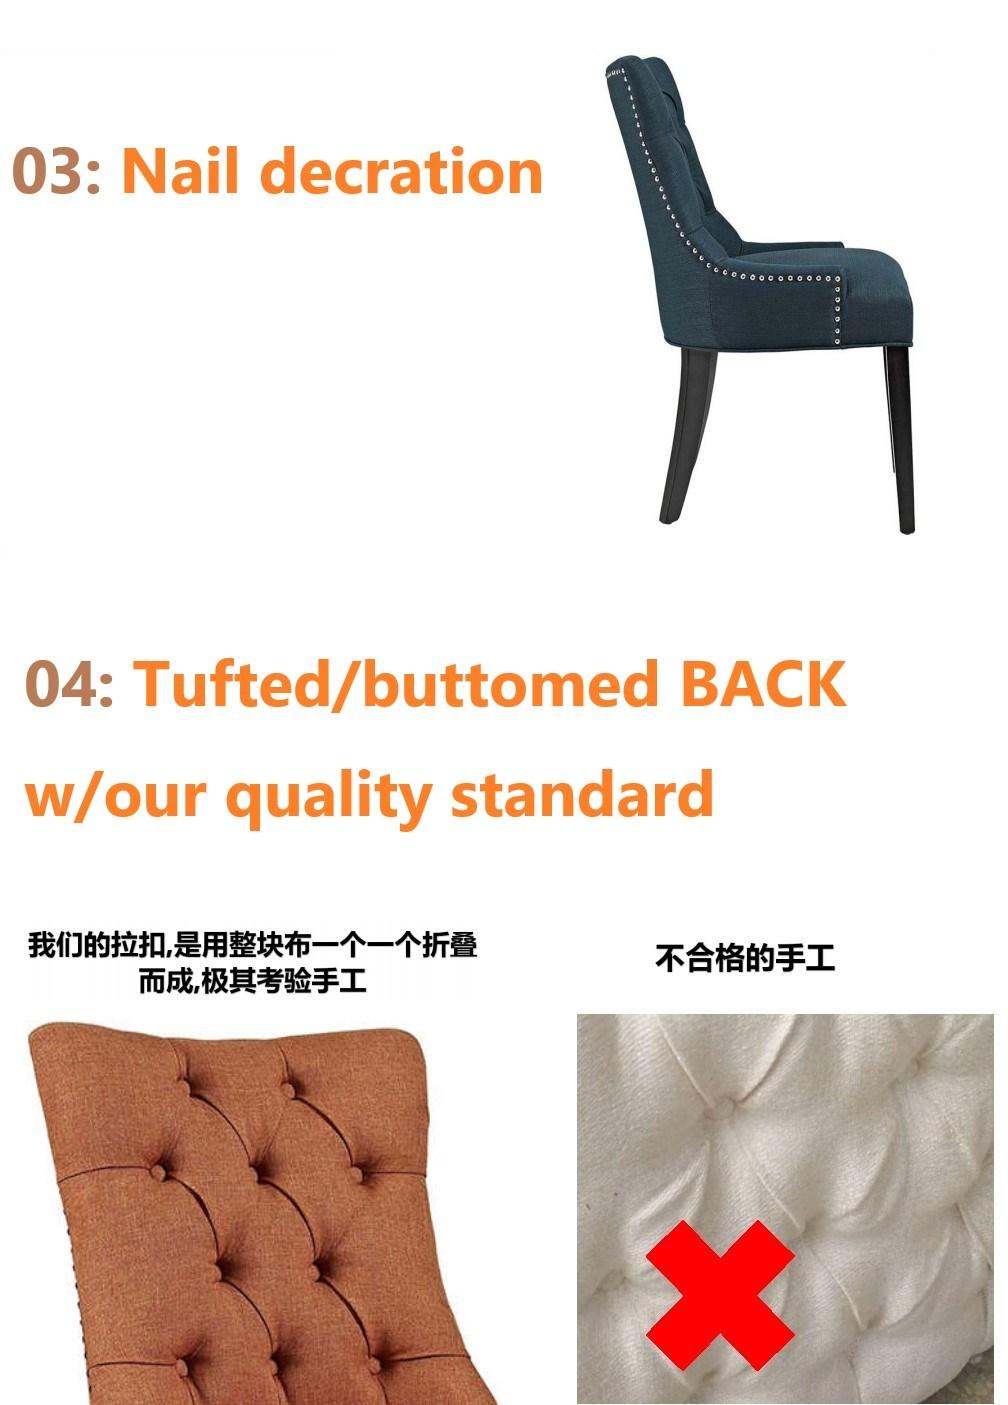 Fabric Button Back Tufted Accent Antique Upholstered Hotel Restaurant Rubber Wood Leg K/D Dining Chairs